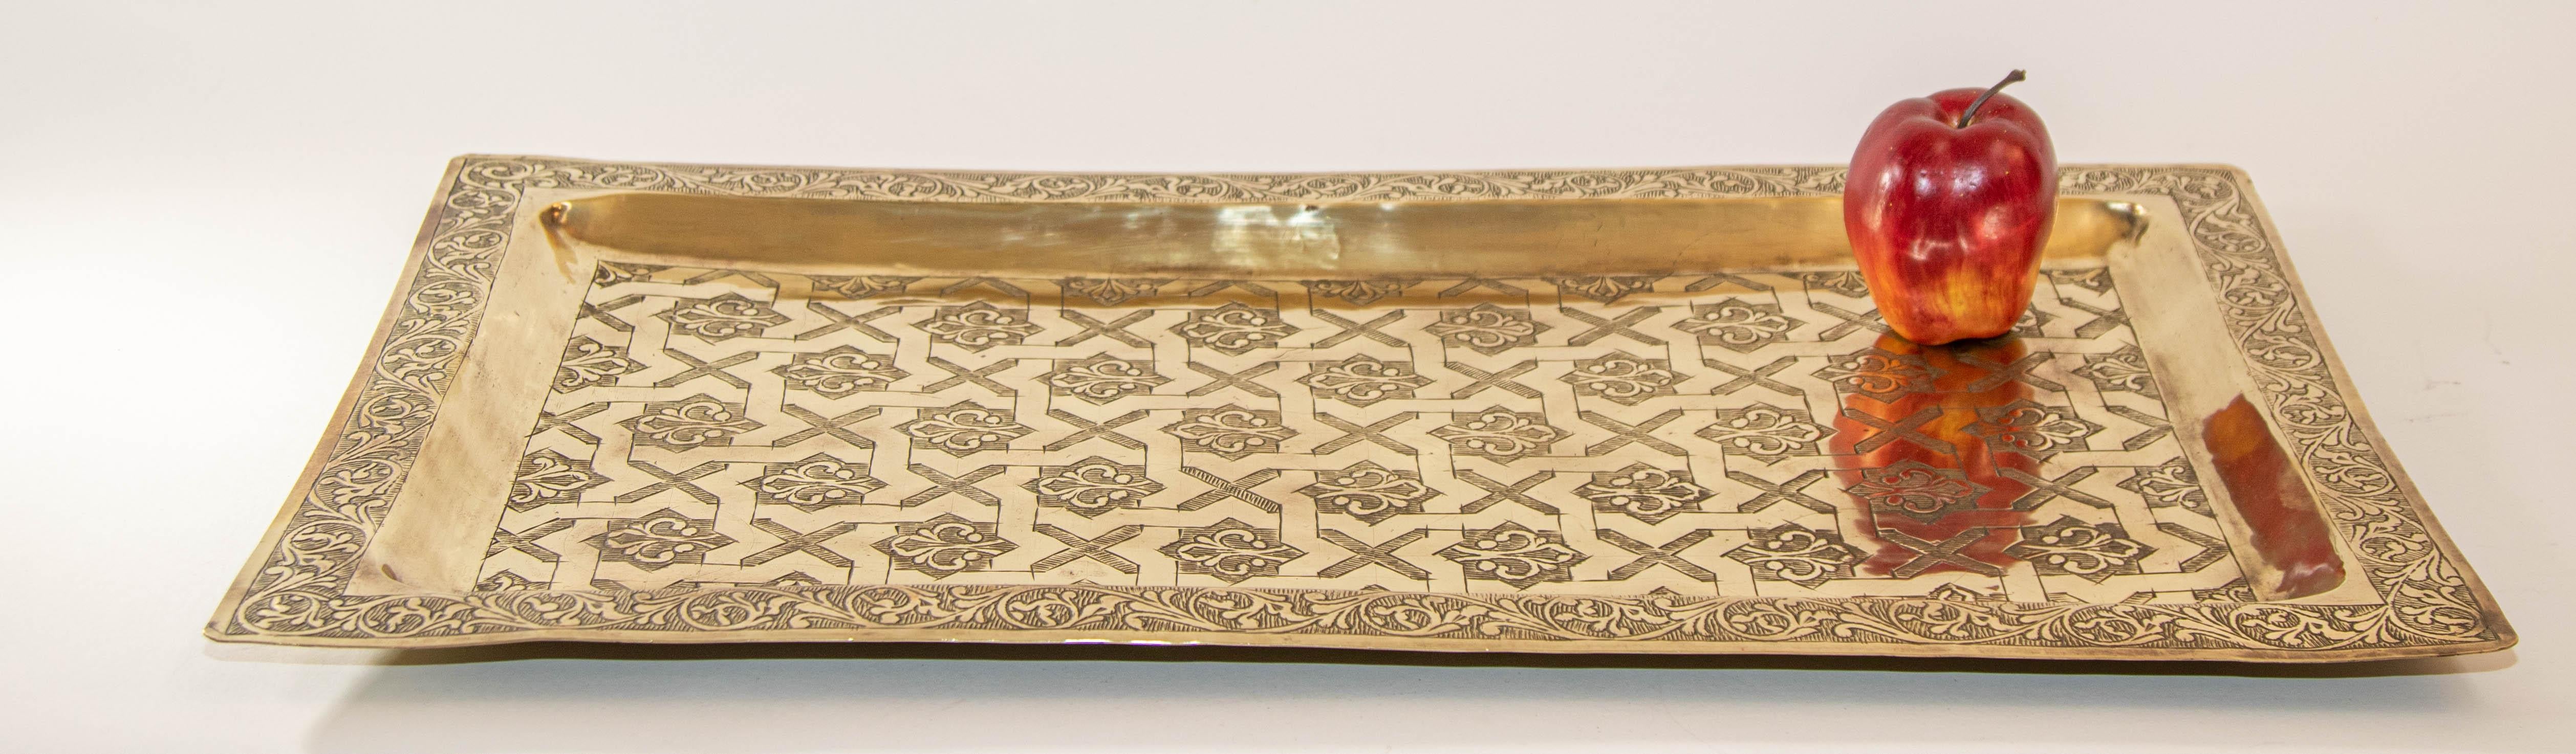 1940s Moroccan Brass Tray Rectangular Shape Polished Gold Brass Serving Platter For Sale 4